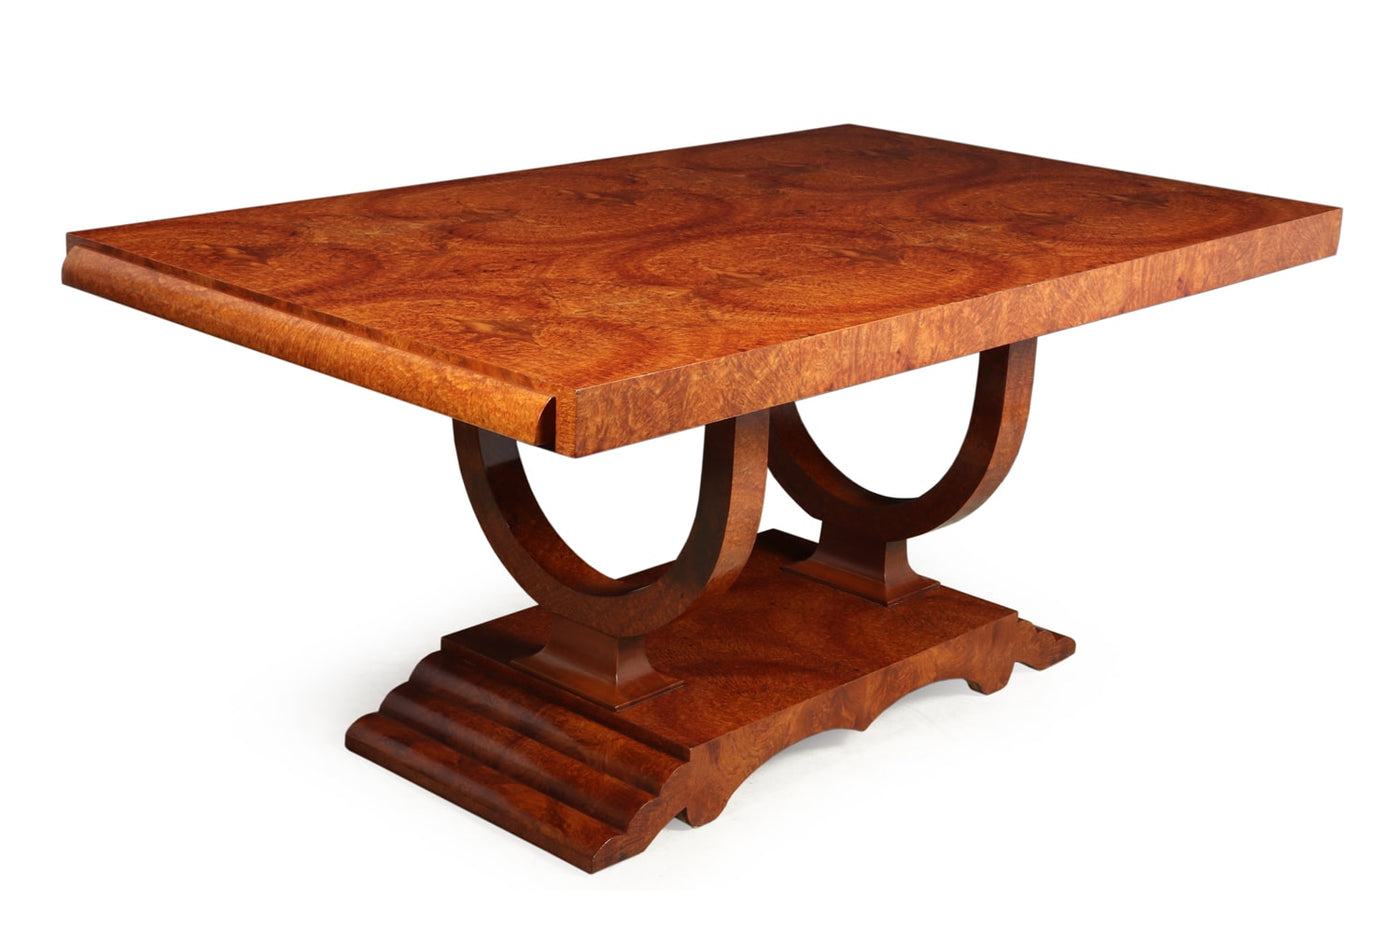 A French Art Deco Amboyna Extending Dining Table Circa 1930